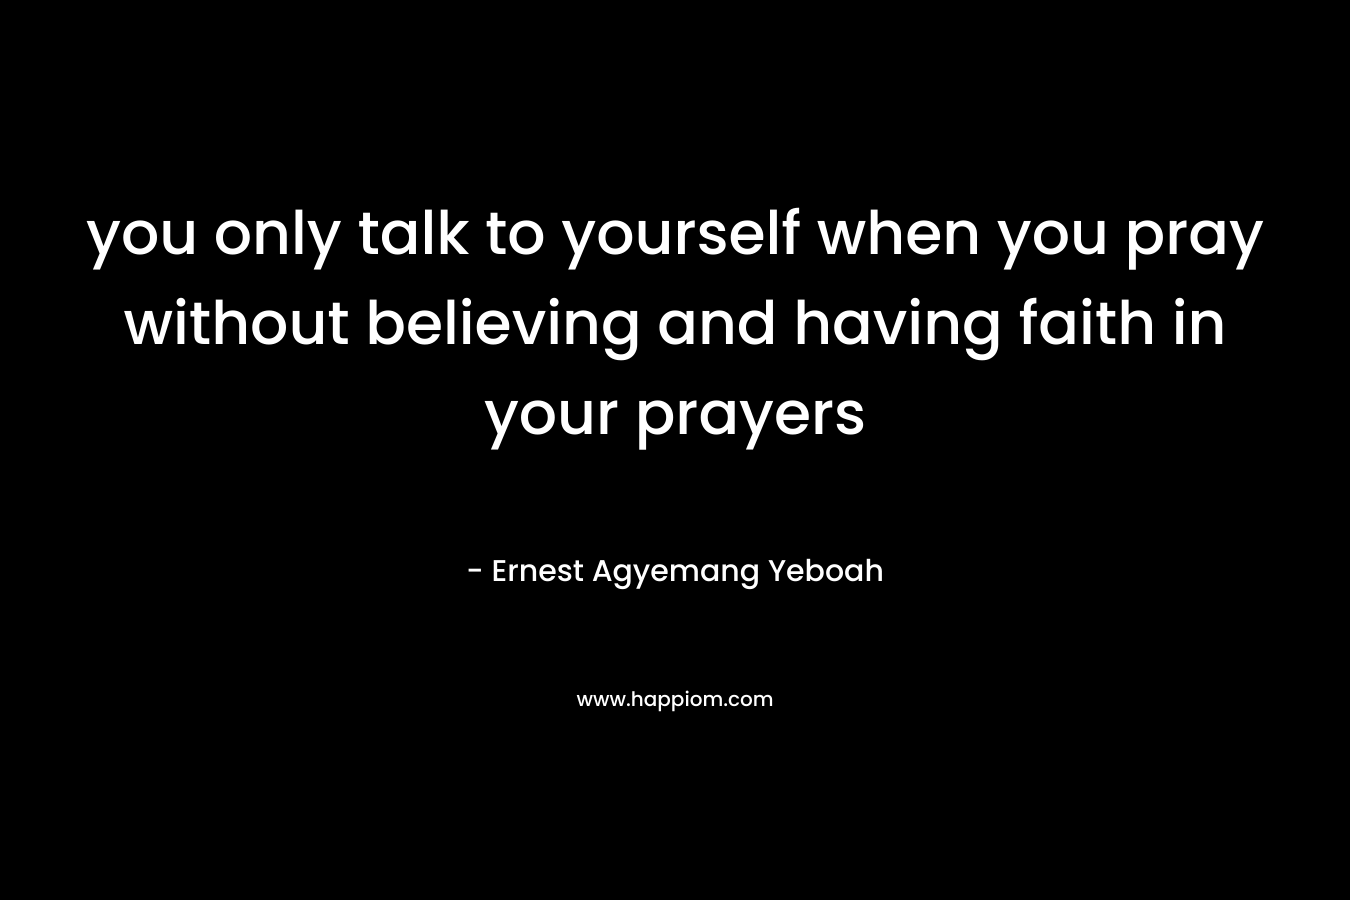 you only talk to yourself when you pray without believing and having faith in your prayers – Ernest Agyemang Yeboah